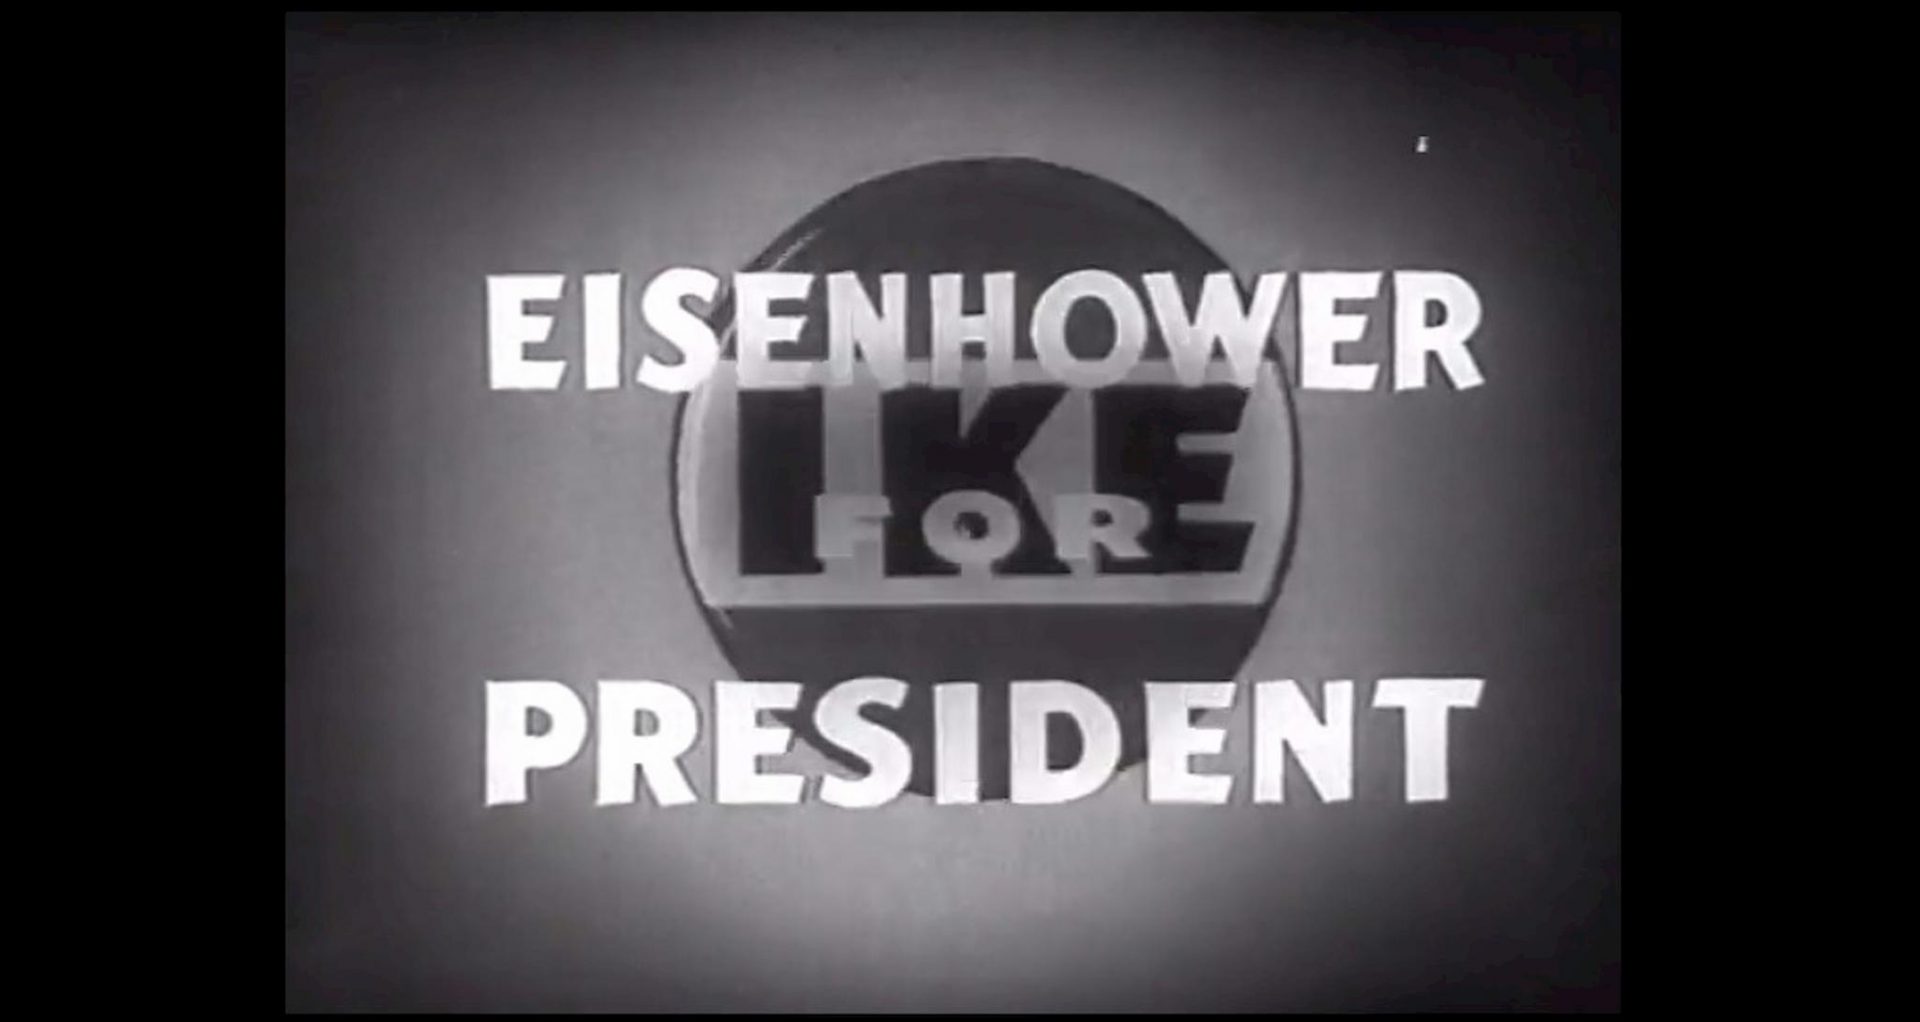 The opening title to a 1952 television ad from presidential candidate Dwight D. Eisenhower.